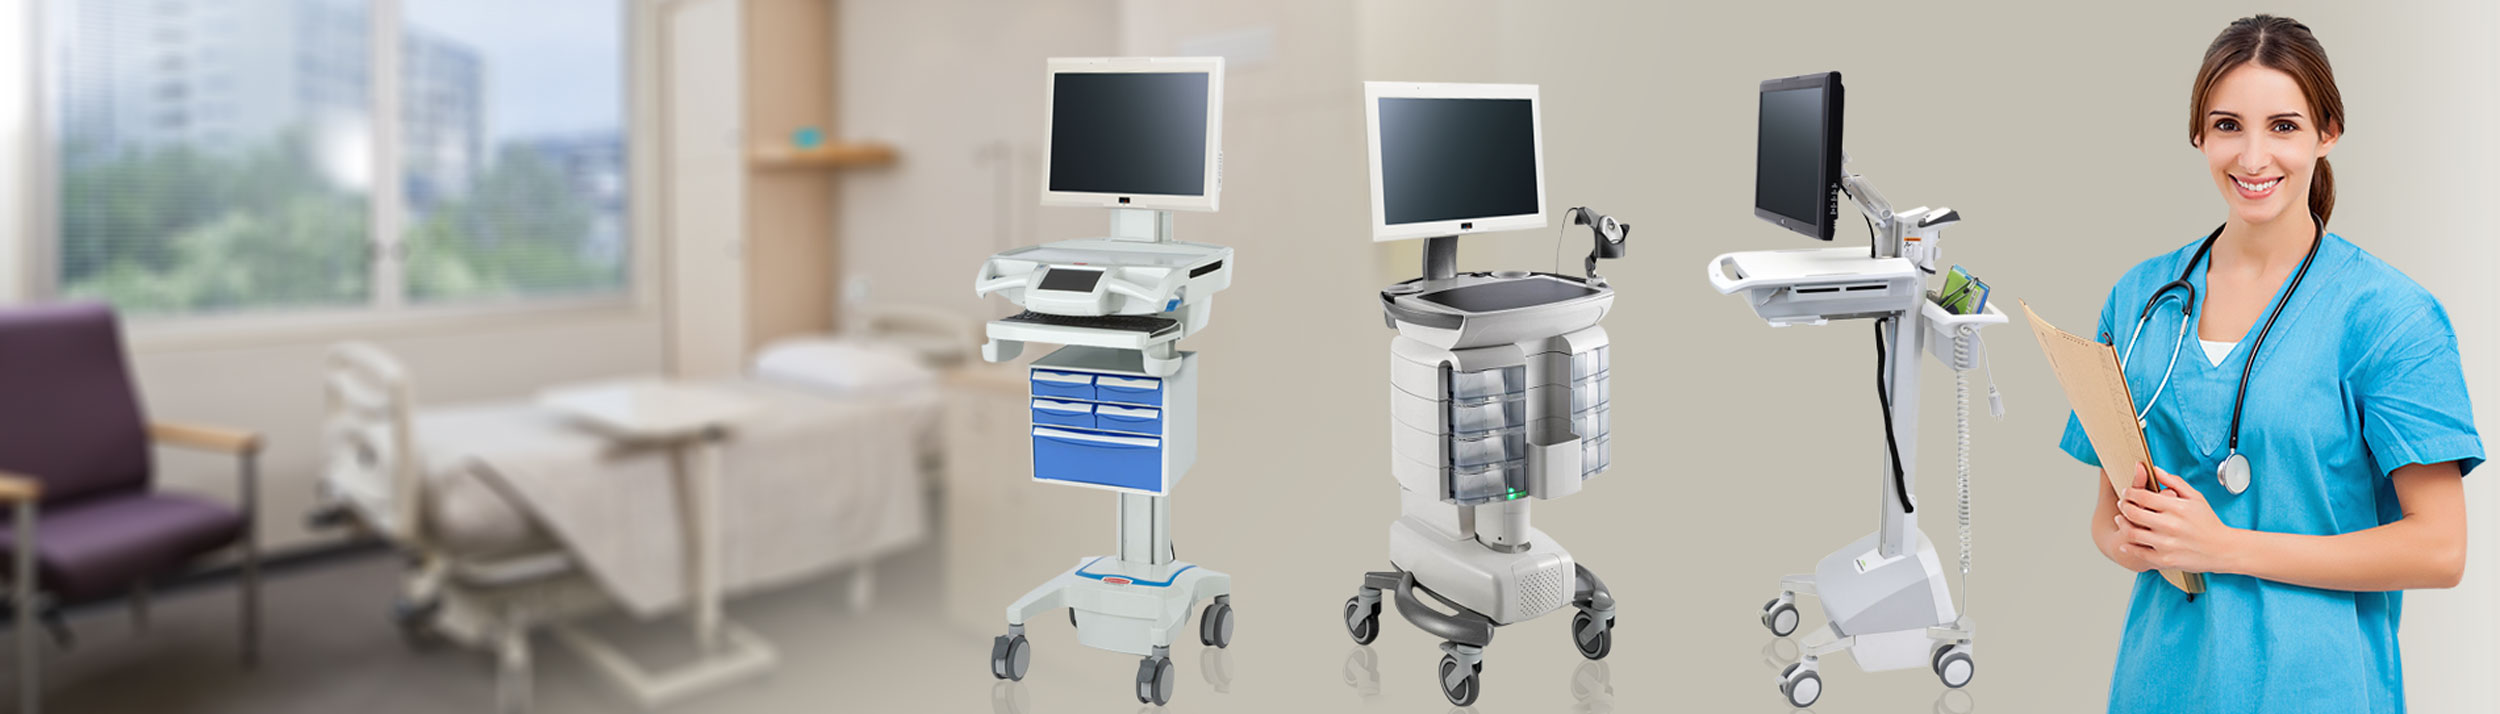 ADITI Medical Cart Computers / Computers on Wheels for eMar and Mobile Cart Solutions